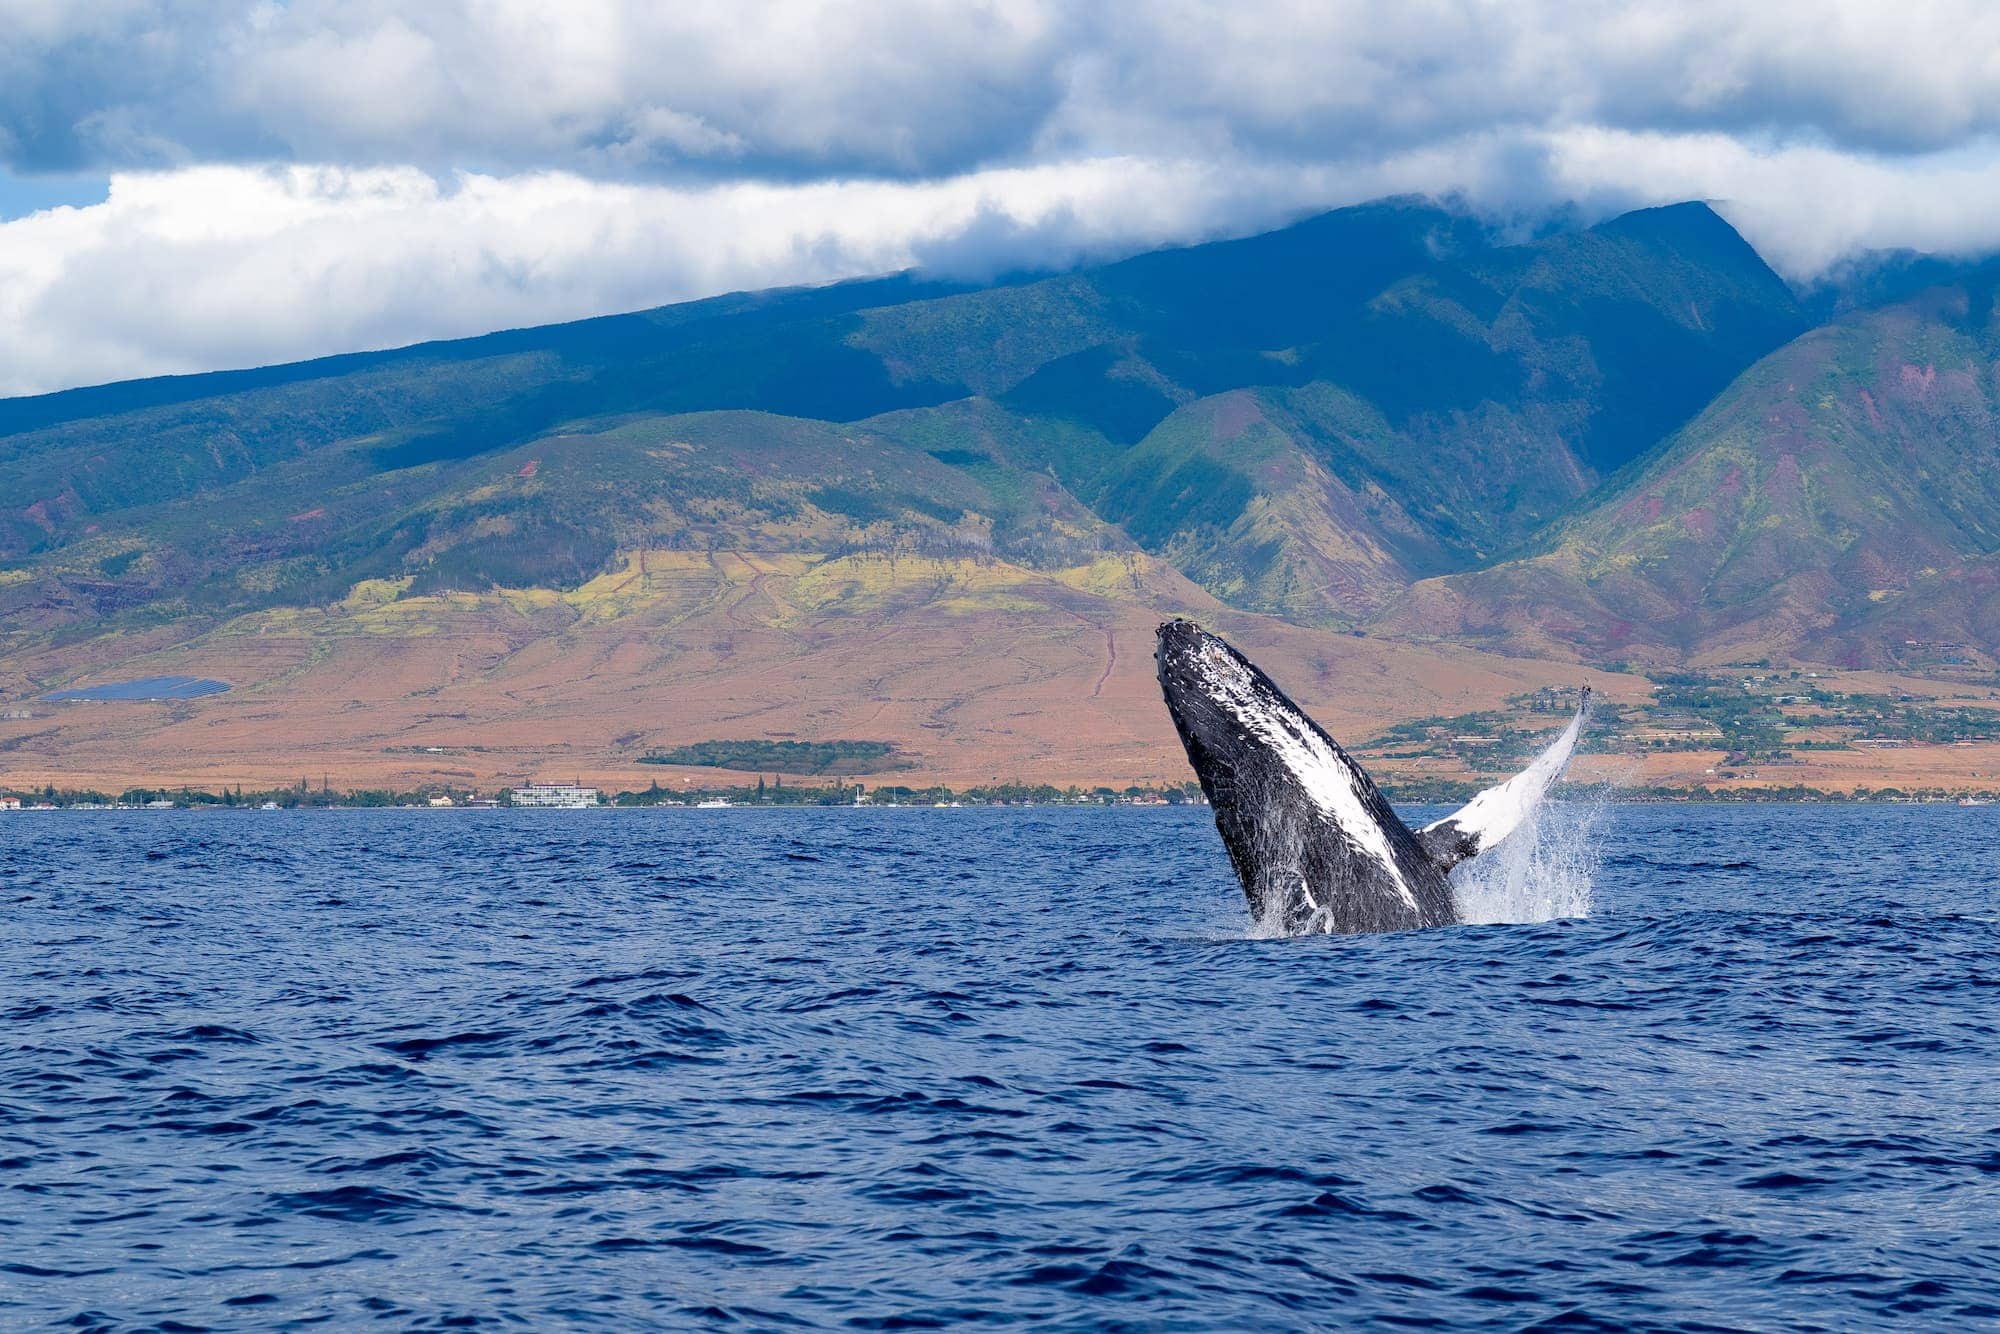 Maui Whale Watching: the Best Tours, FAQ, and DIY Tips